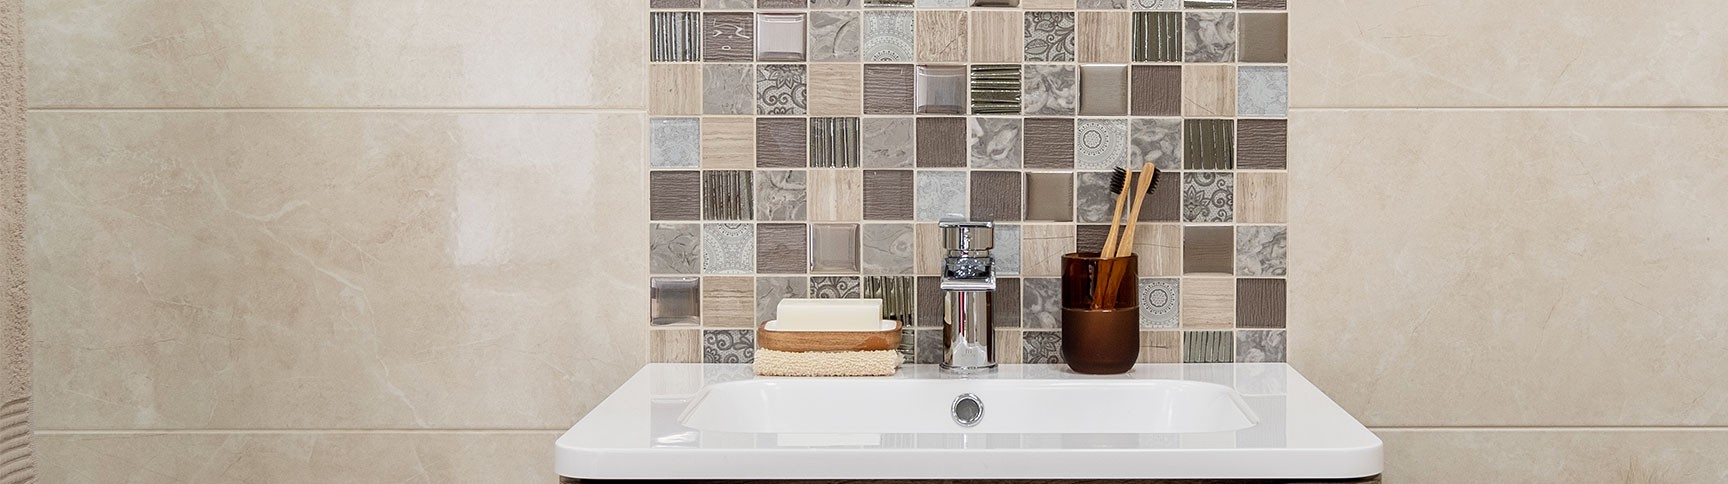 Mosaic Wall Tiles | Latest Trends at Great Value Prices | World of Tiles